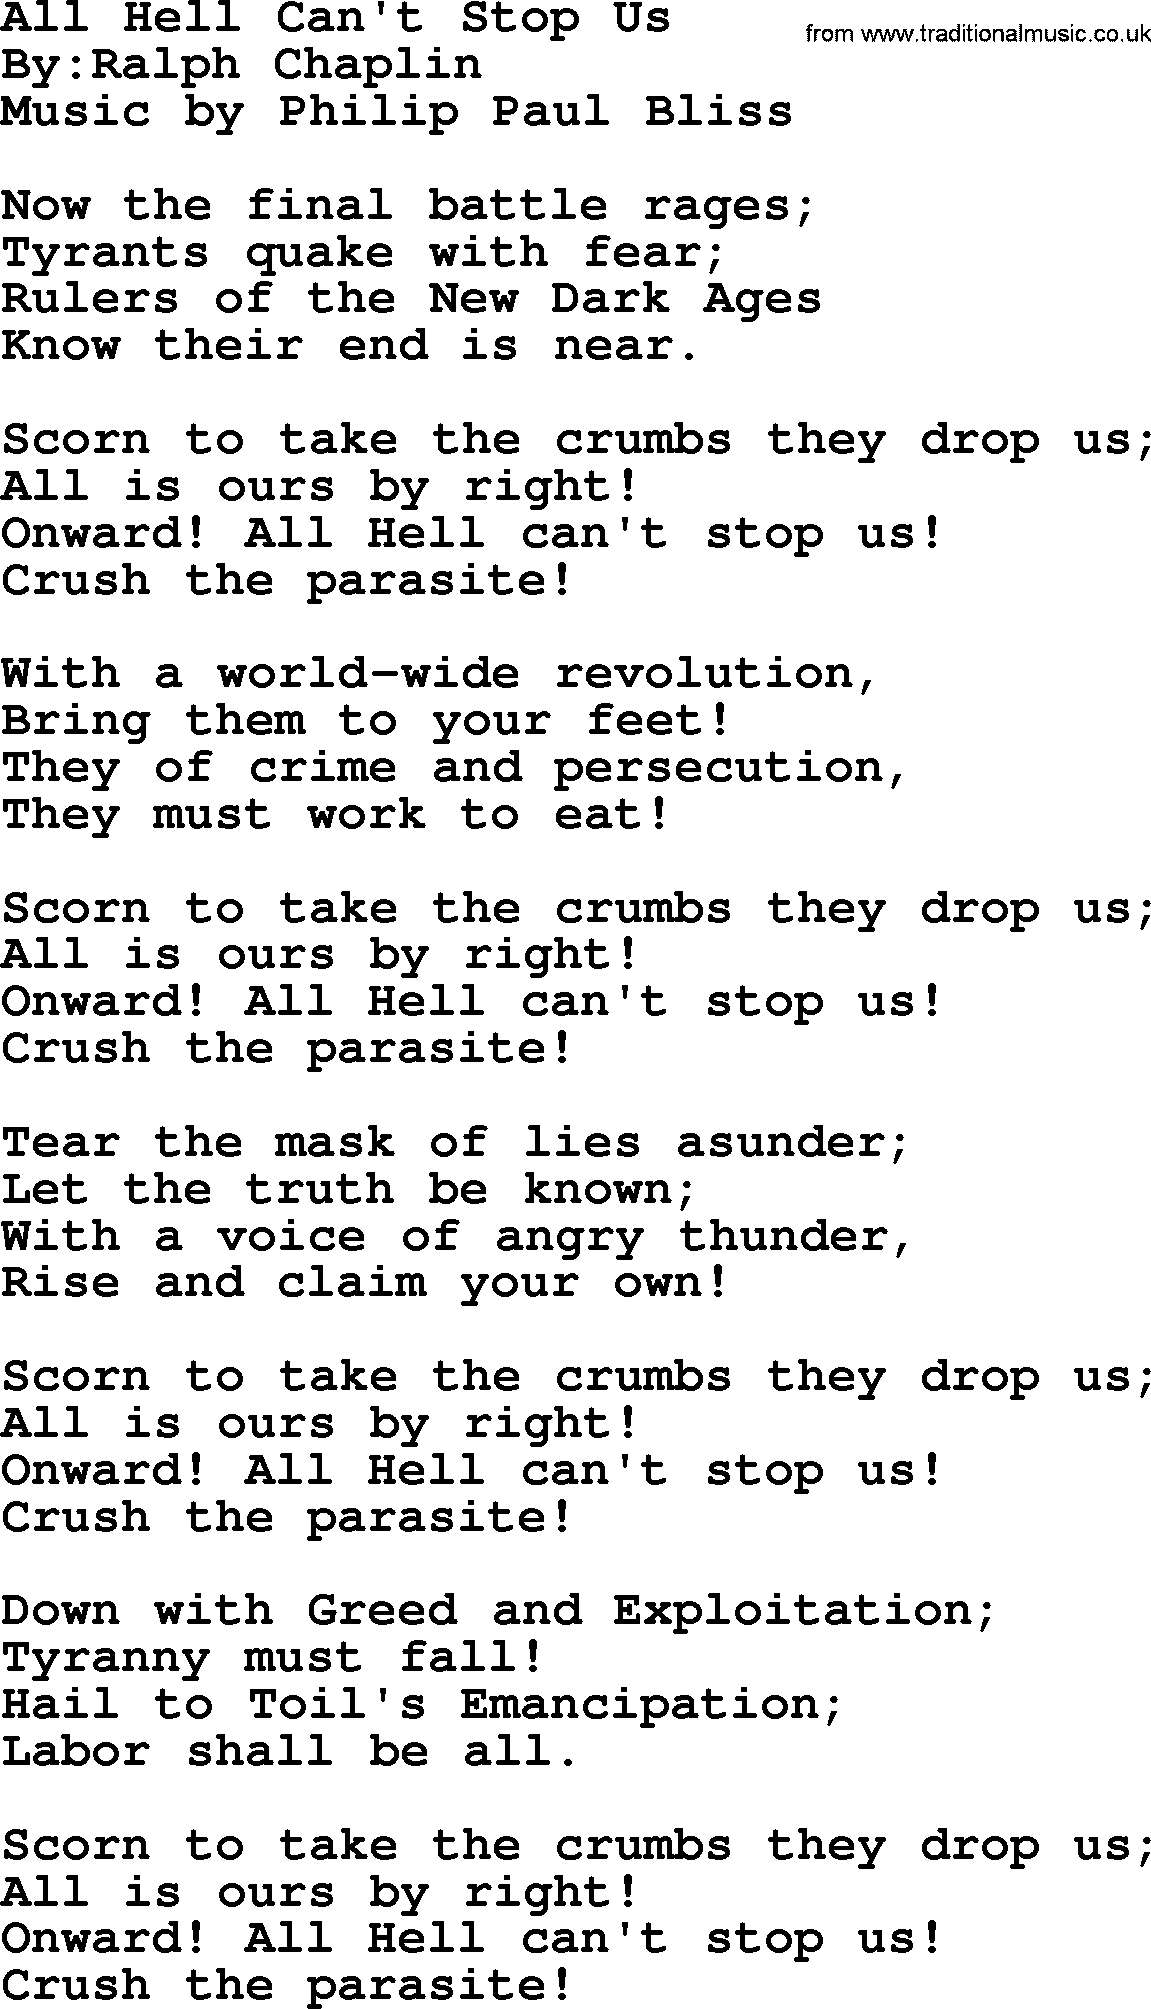 Political, Solidarity, Workers or Union song: All Hell Cant Stop Us, lyrics